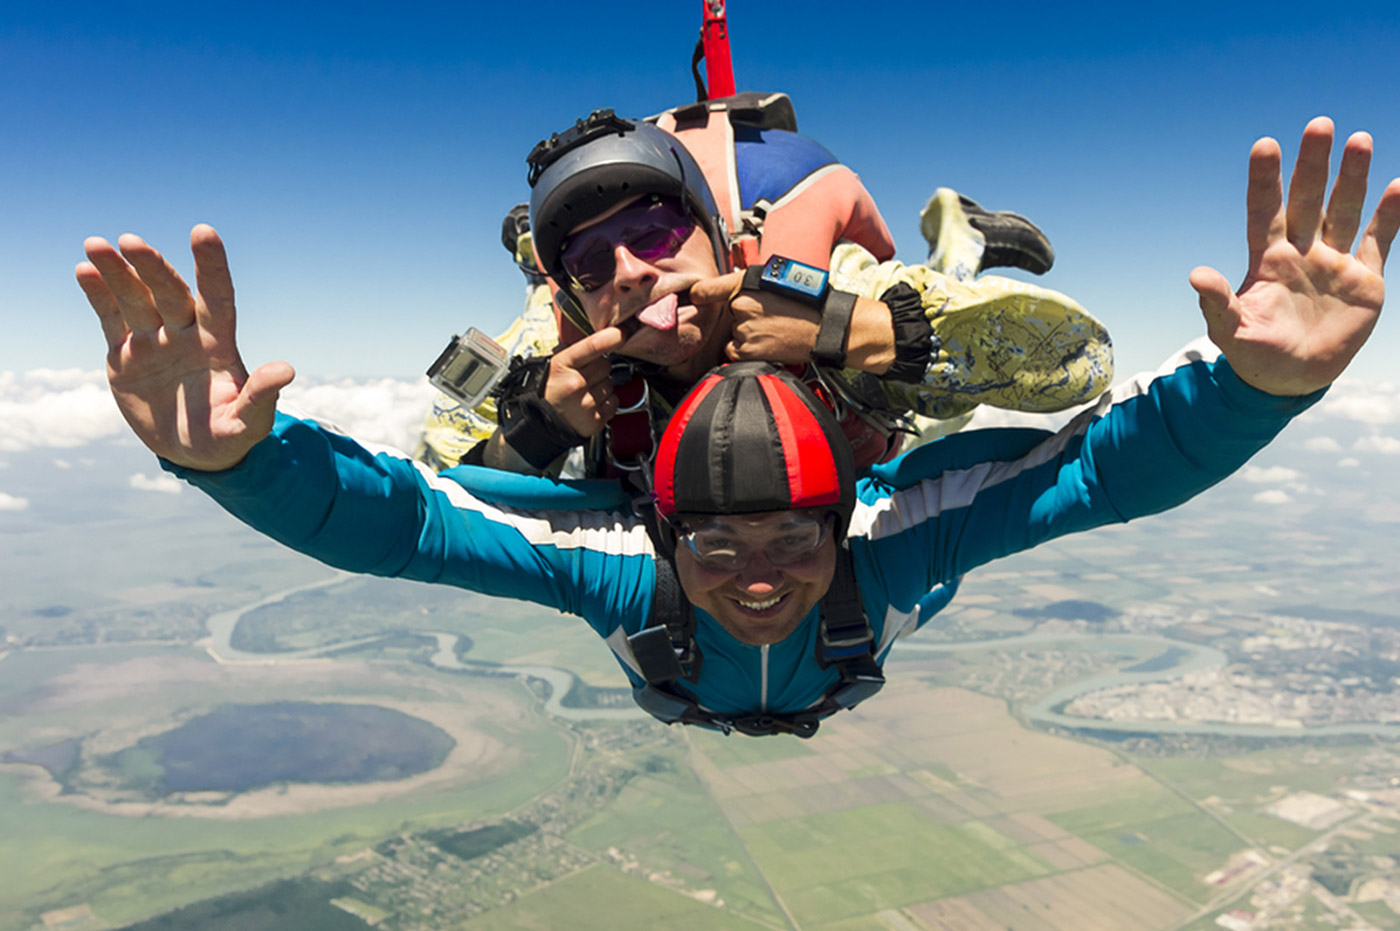 Two men skydiving, one man is making a funny face at the camera.